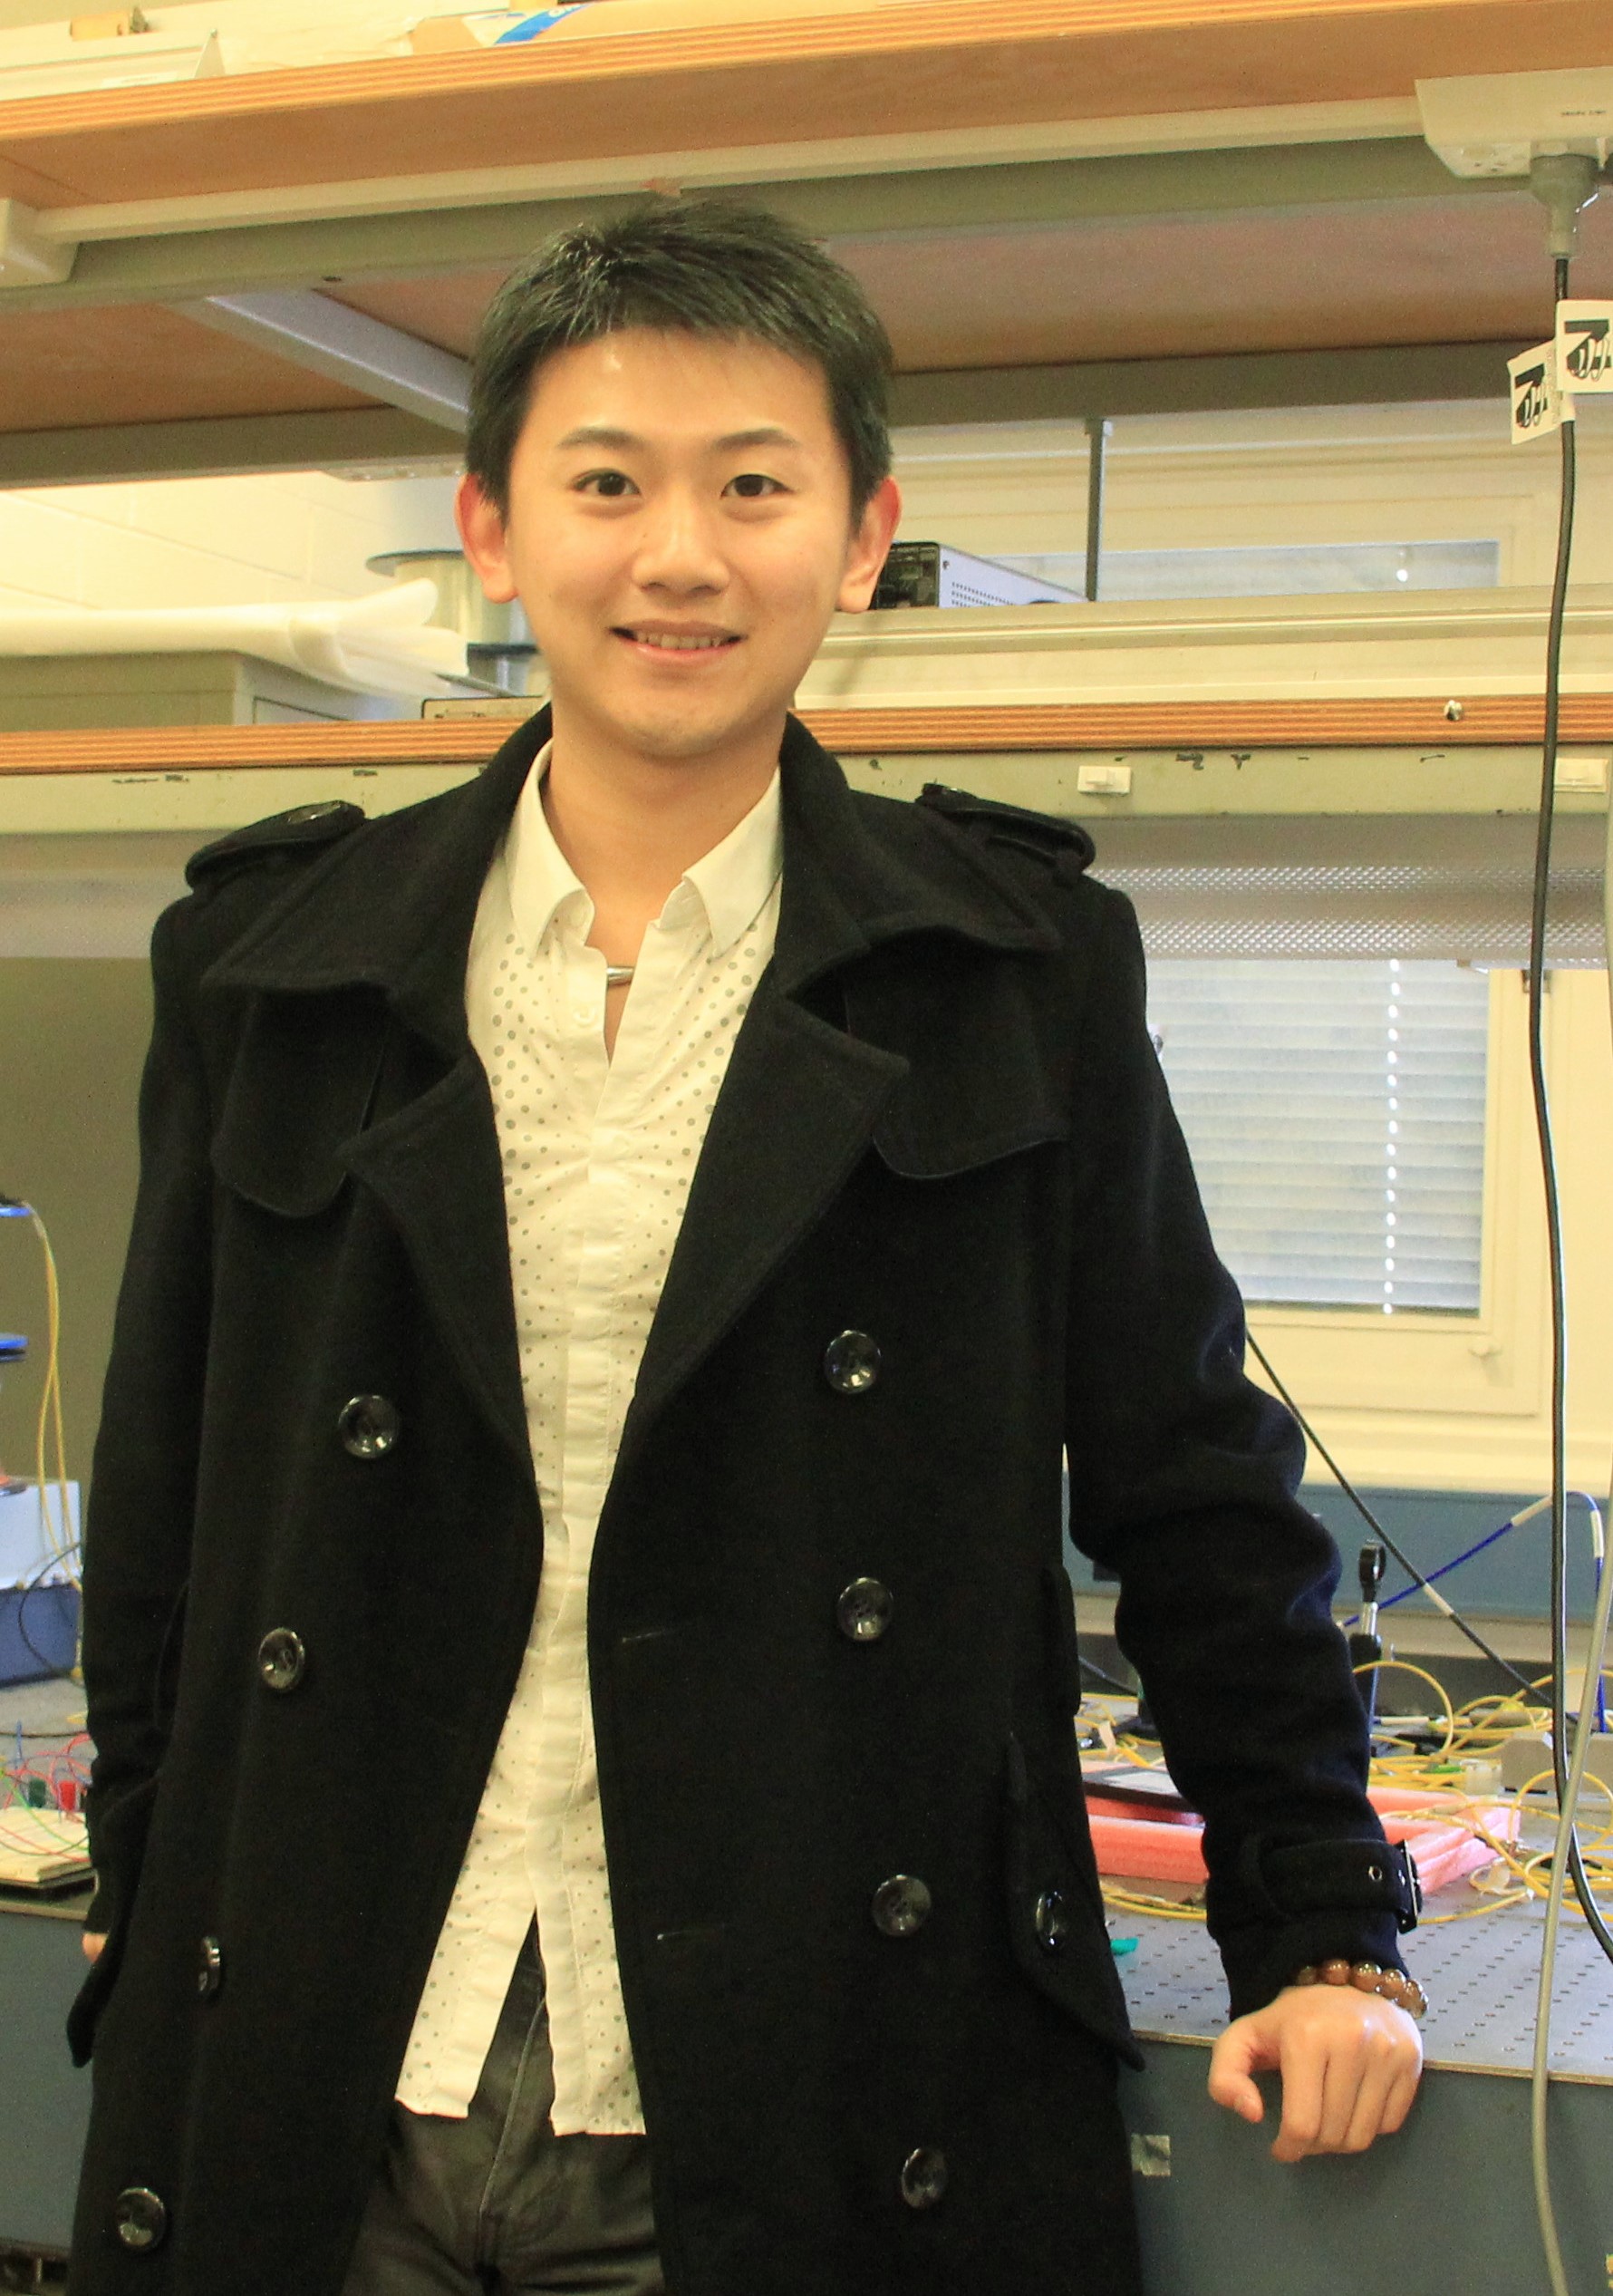 Dr Desmond Wang, Senior Lecturer in Telecommunications Engineering